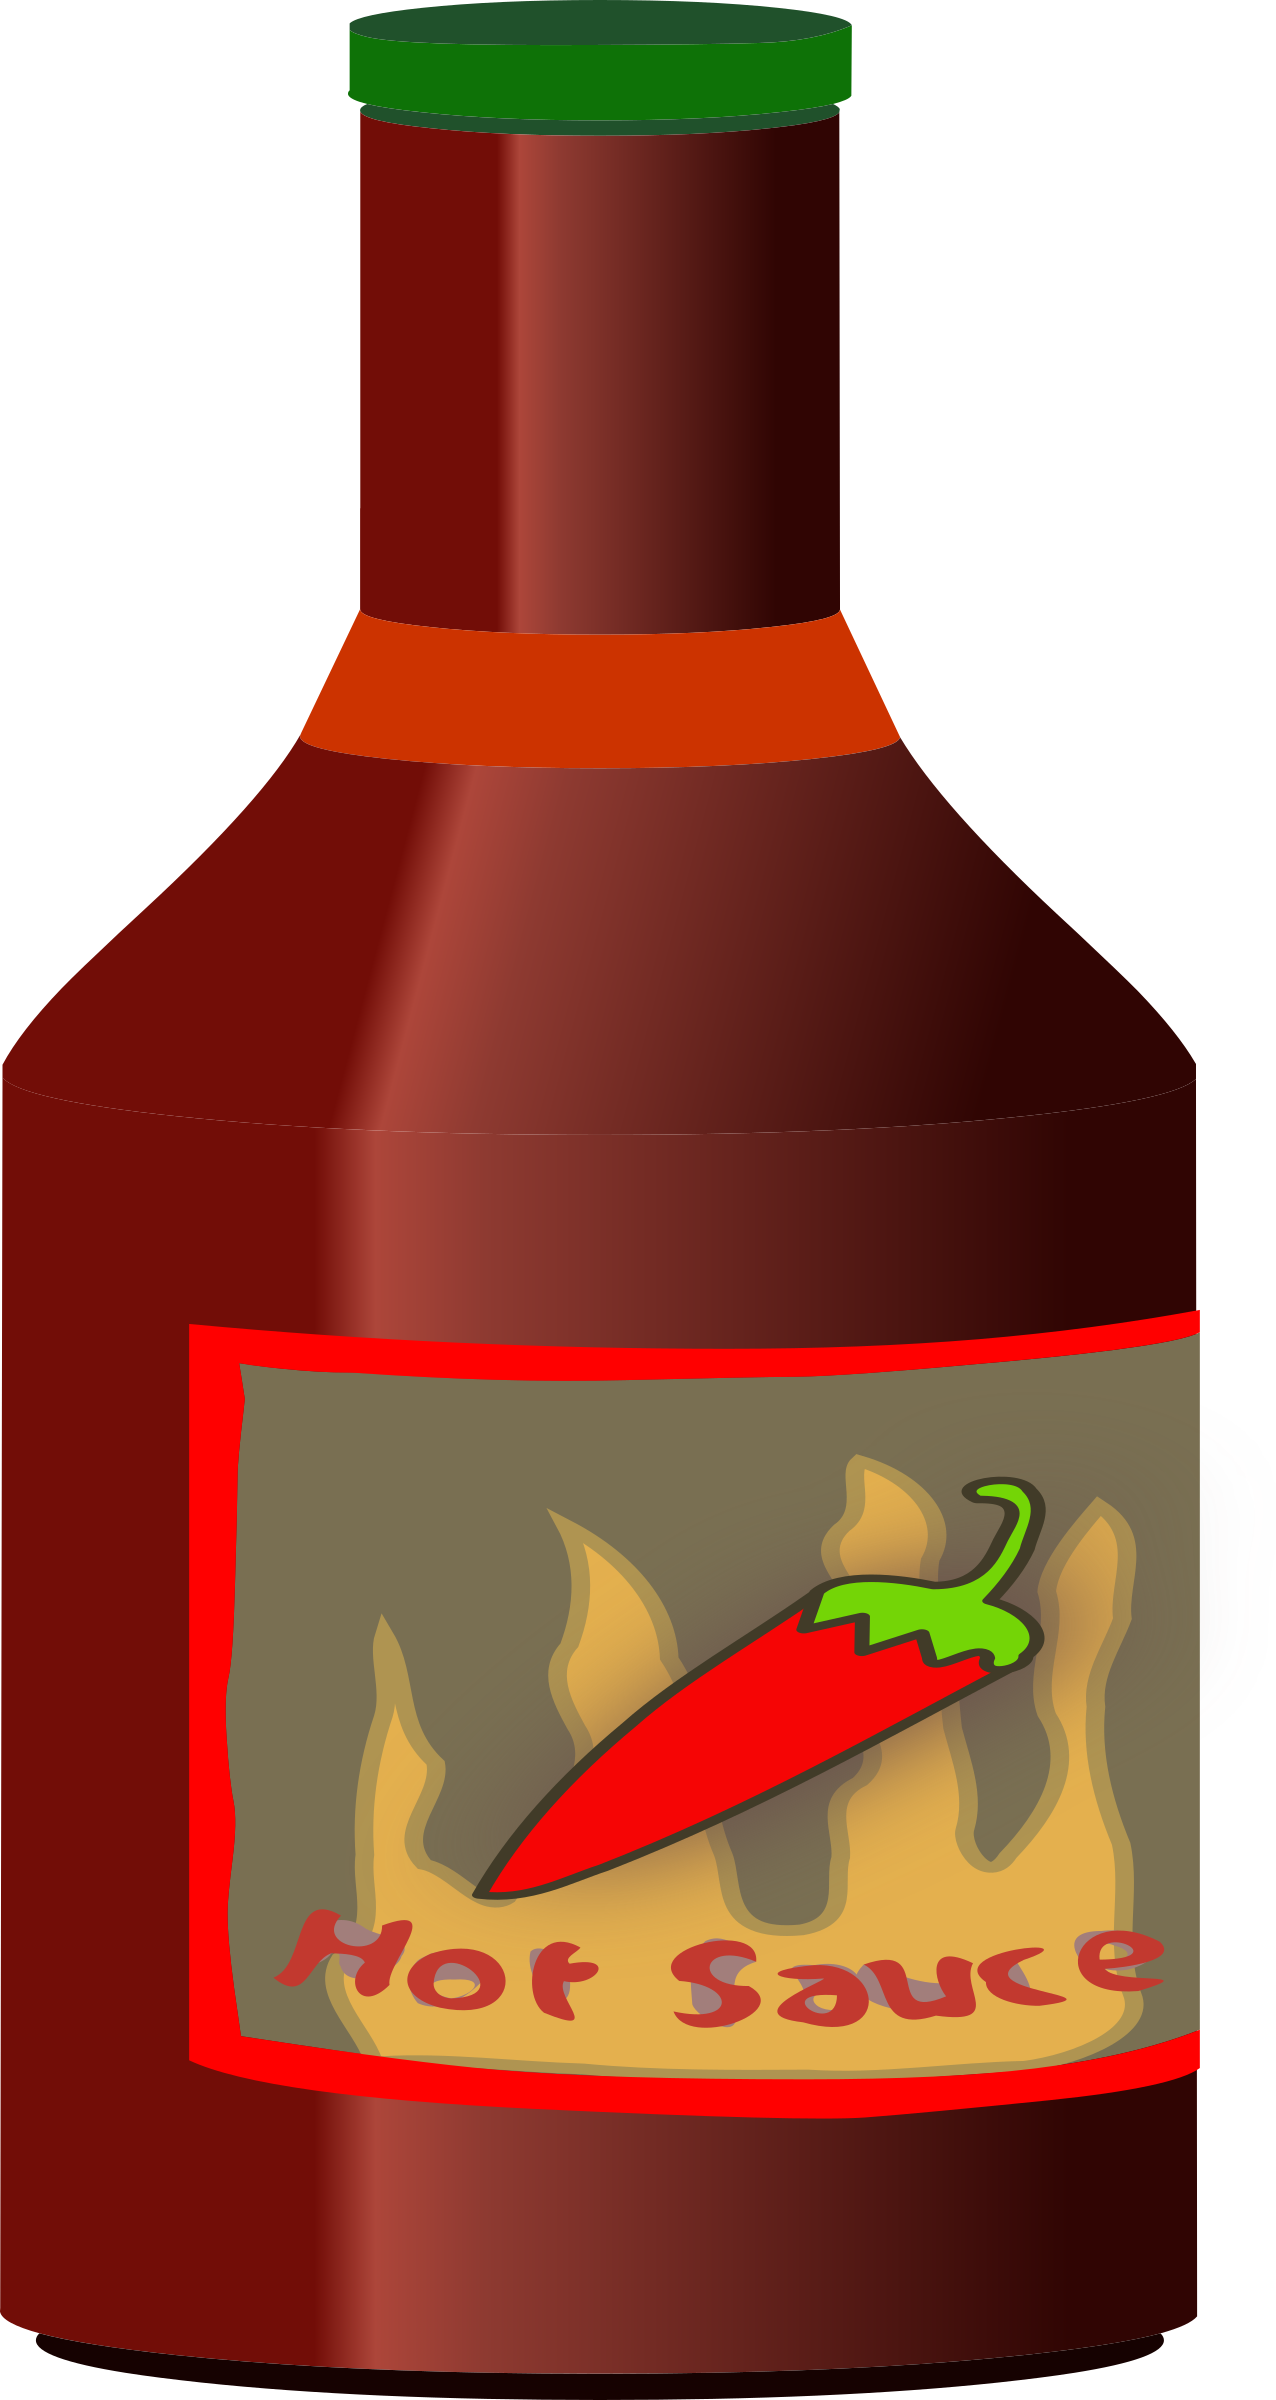 Bottle of hot sauce vector clipart image - Free stock photo - Public